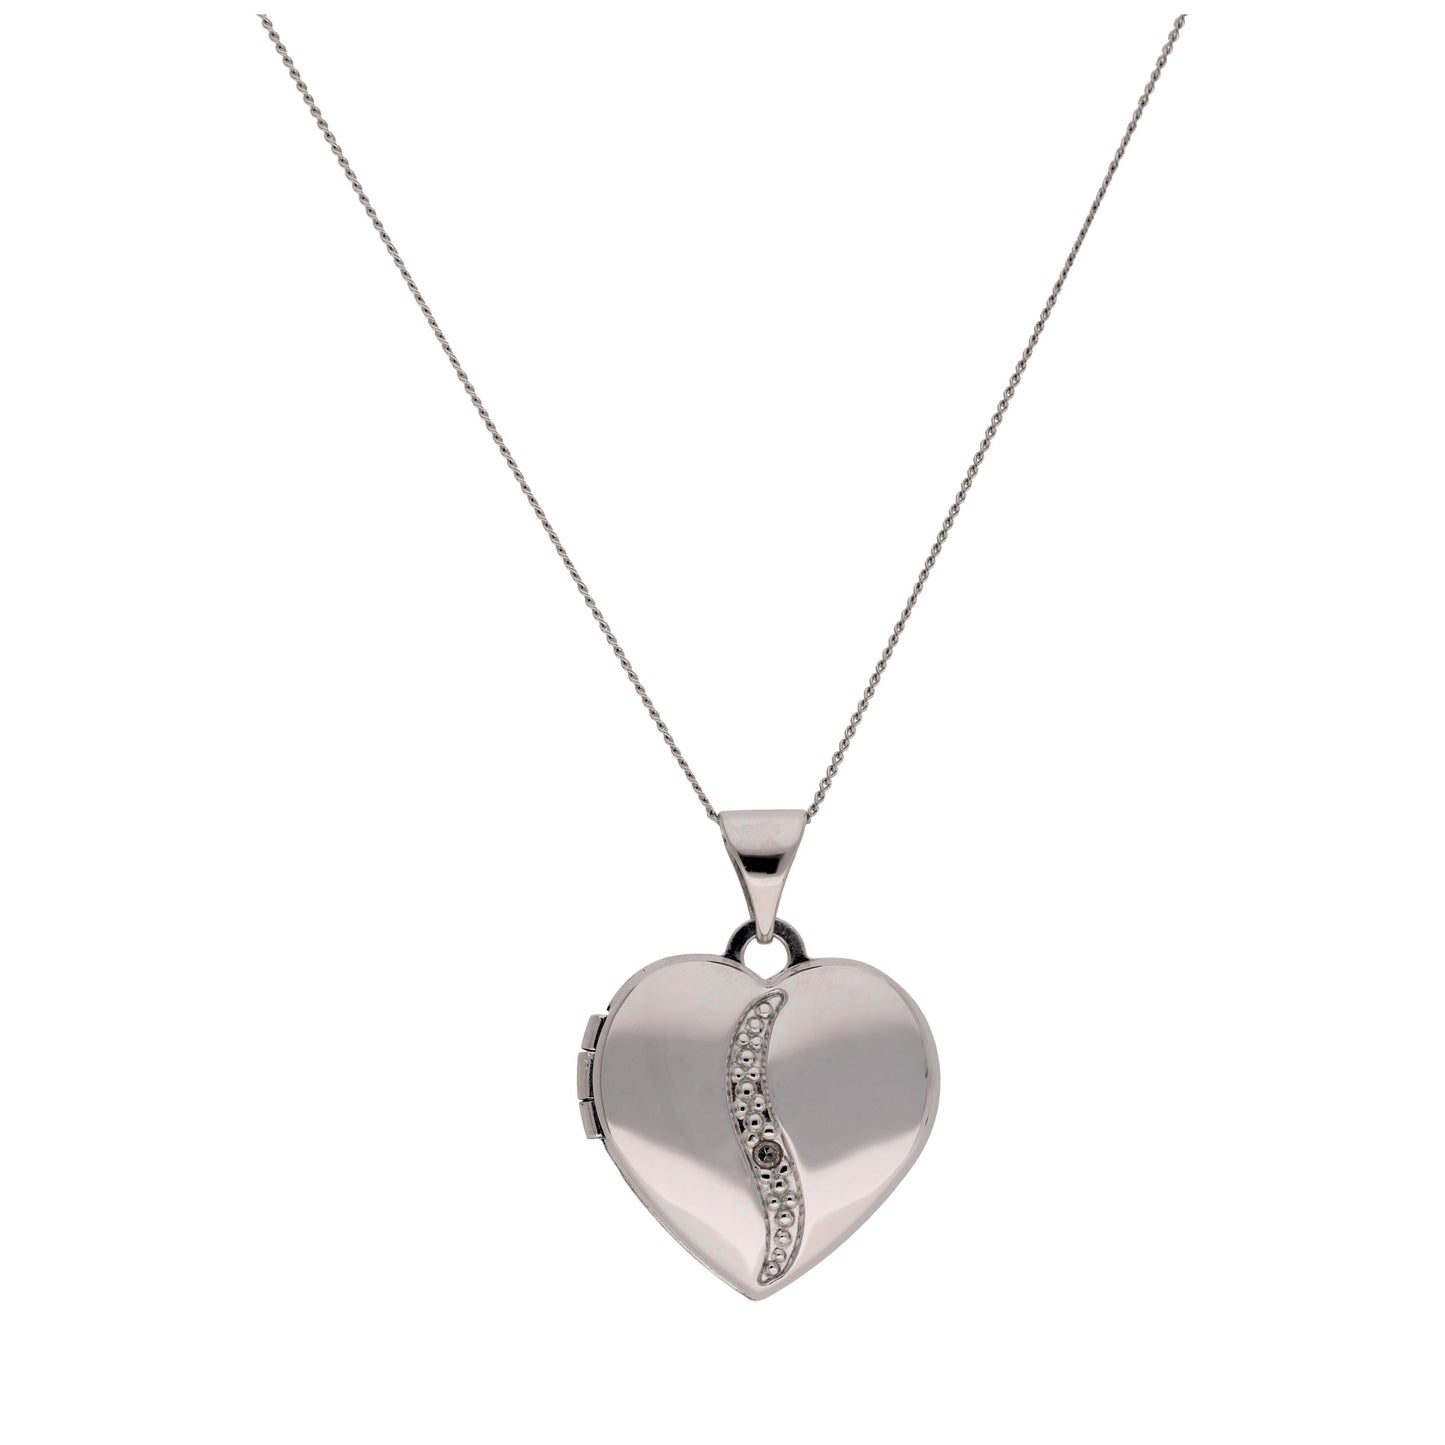 9ct White Gold Heart Locket with Diamond Necklace 16-20 Inch